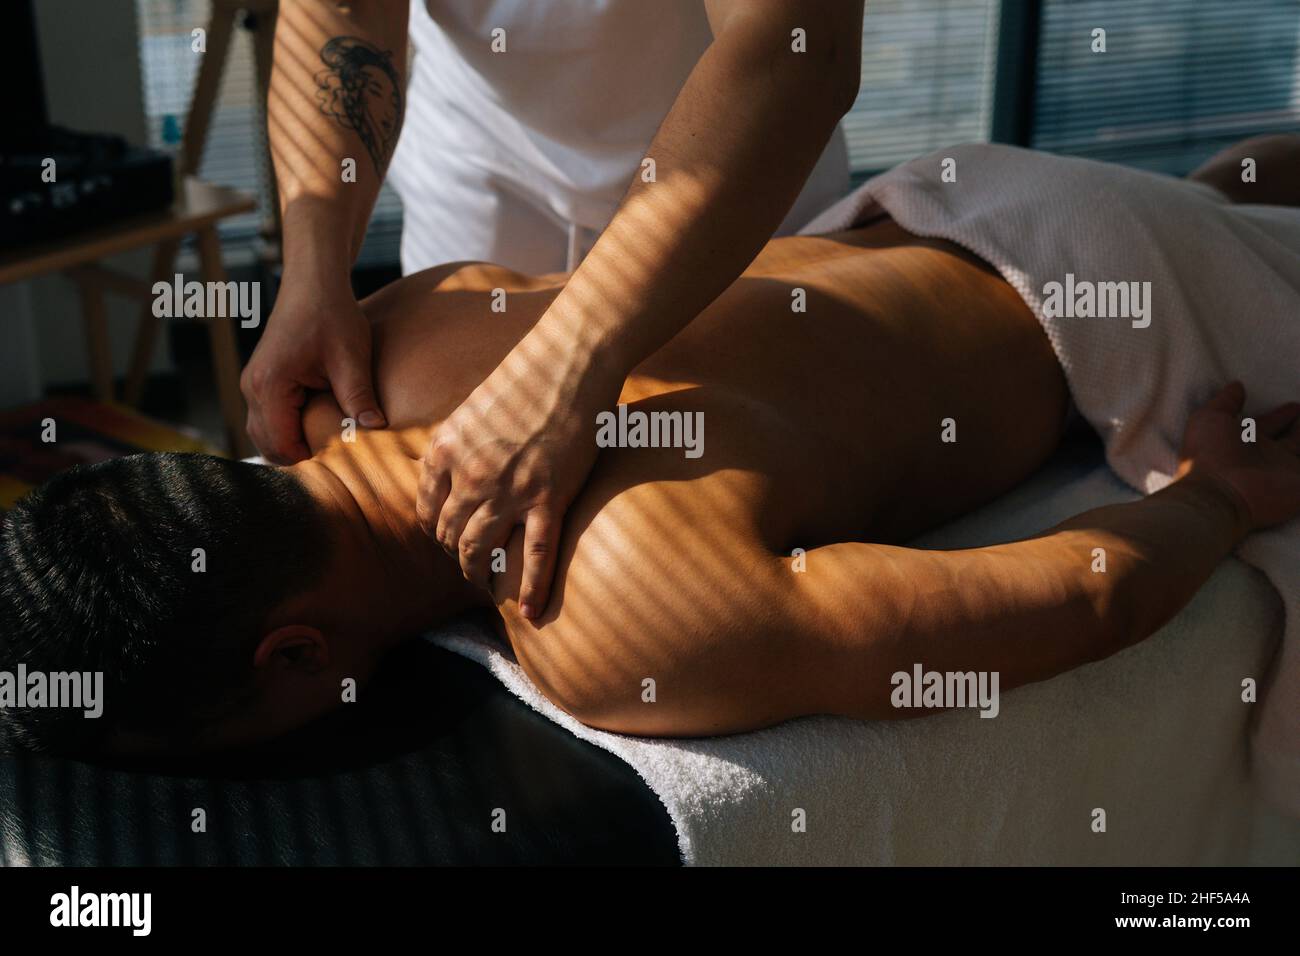 Top close-up view of unrecognizable male masseur with strong tattooed hands massaging neck and shoulders of muscular sports man lying on stomach, Stock Photo